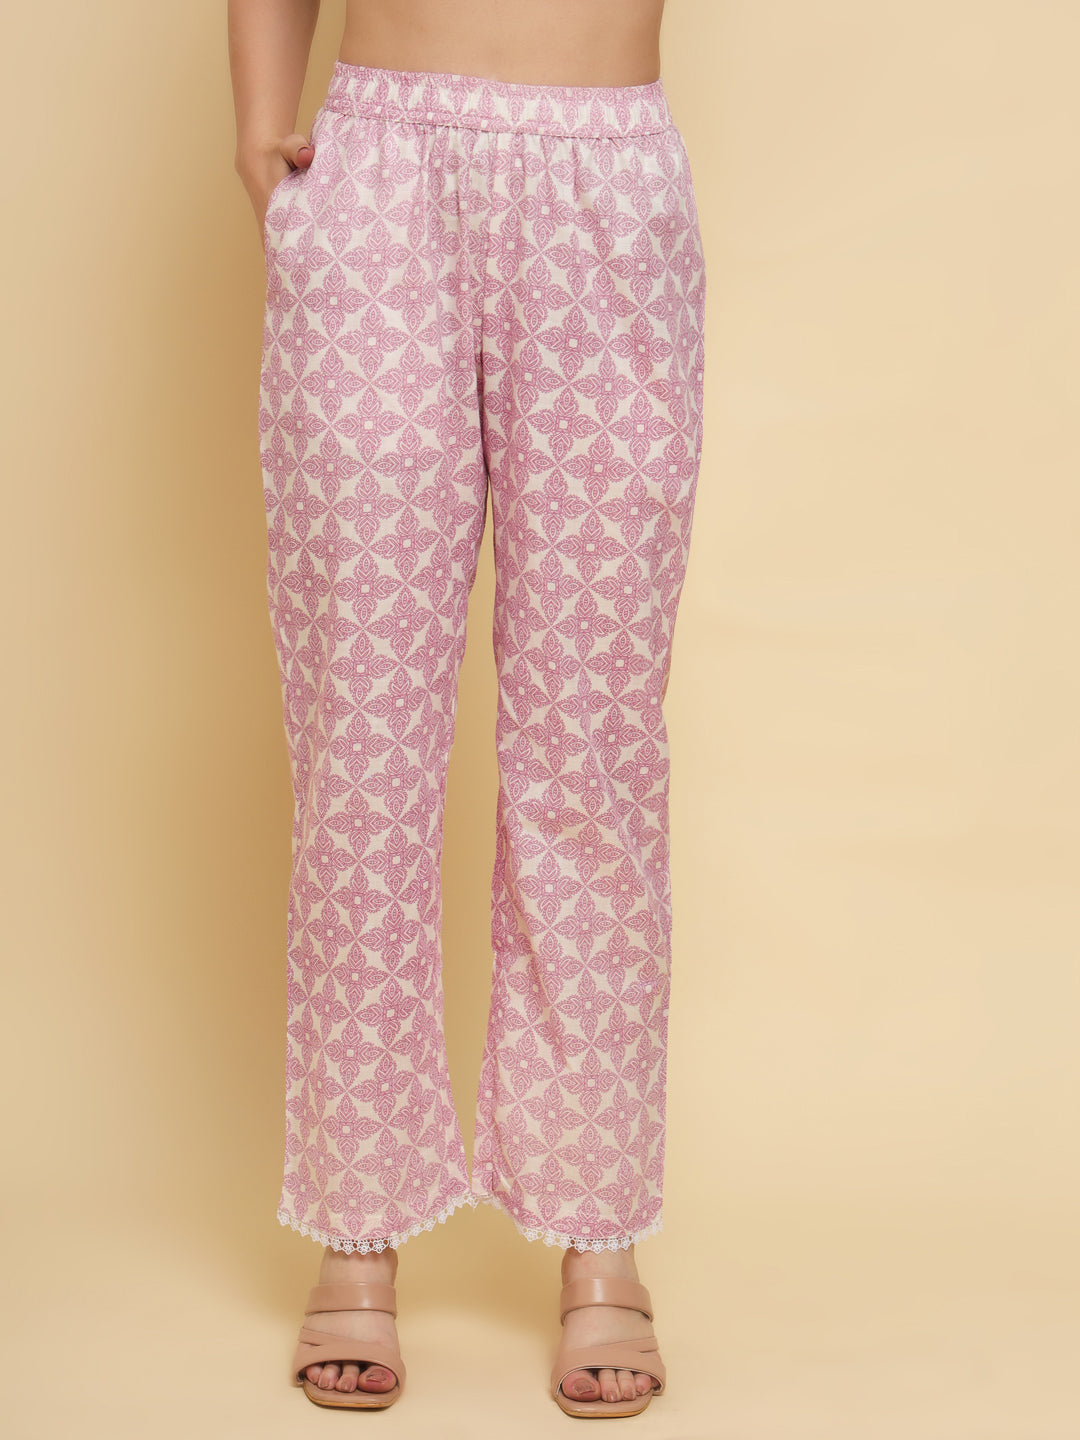 Pink & white printed Kurta with Trousers with dupatta